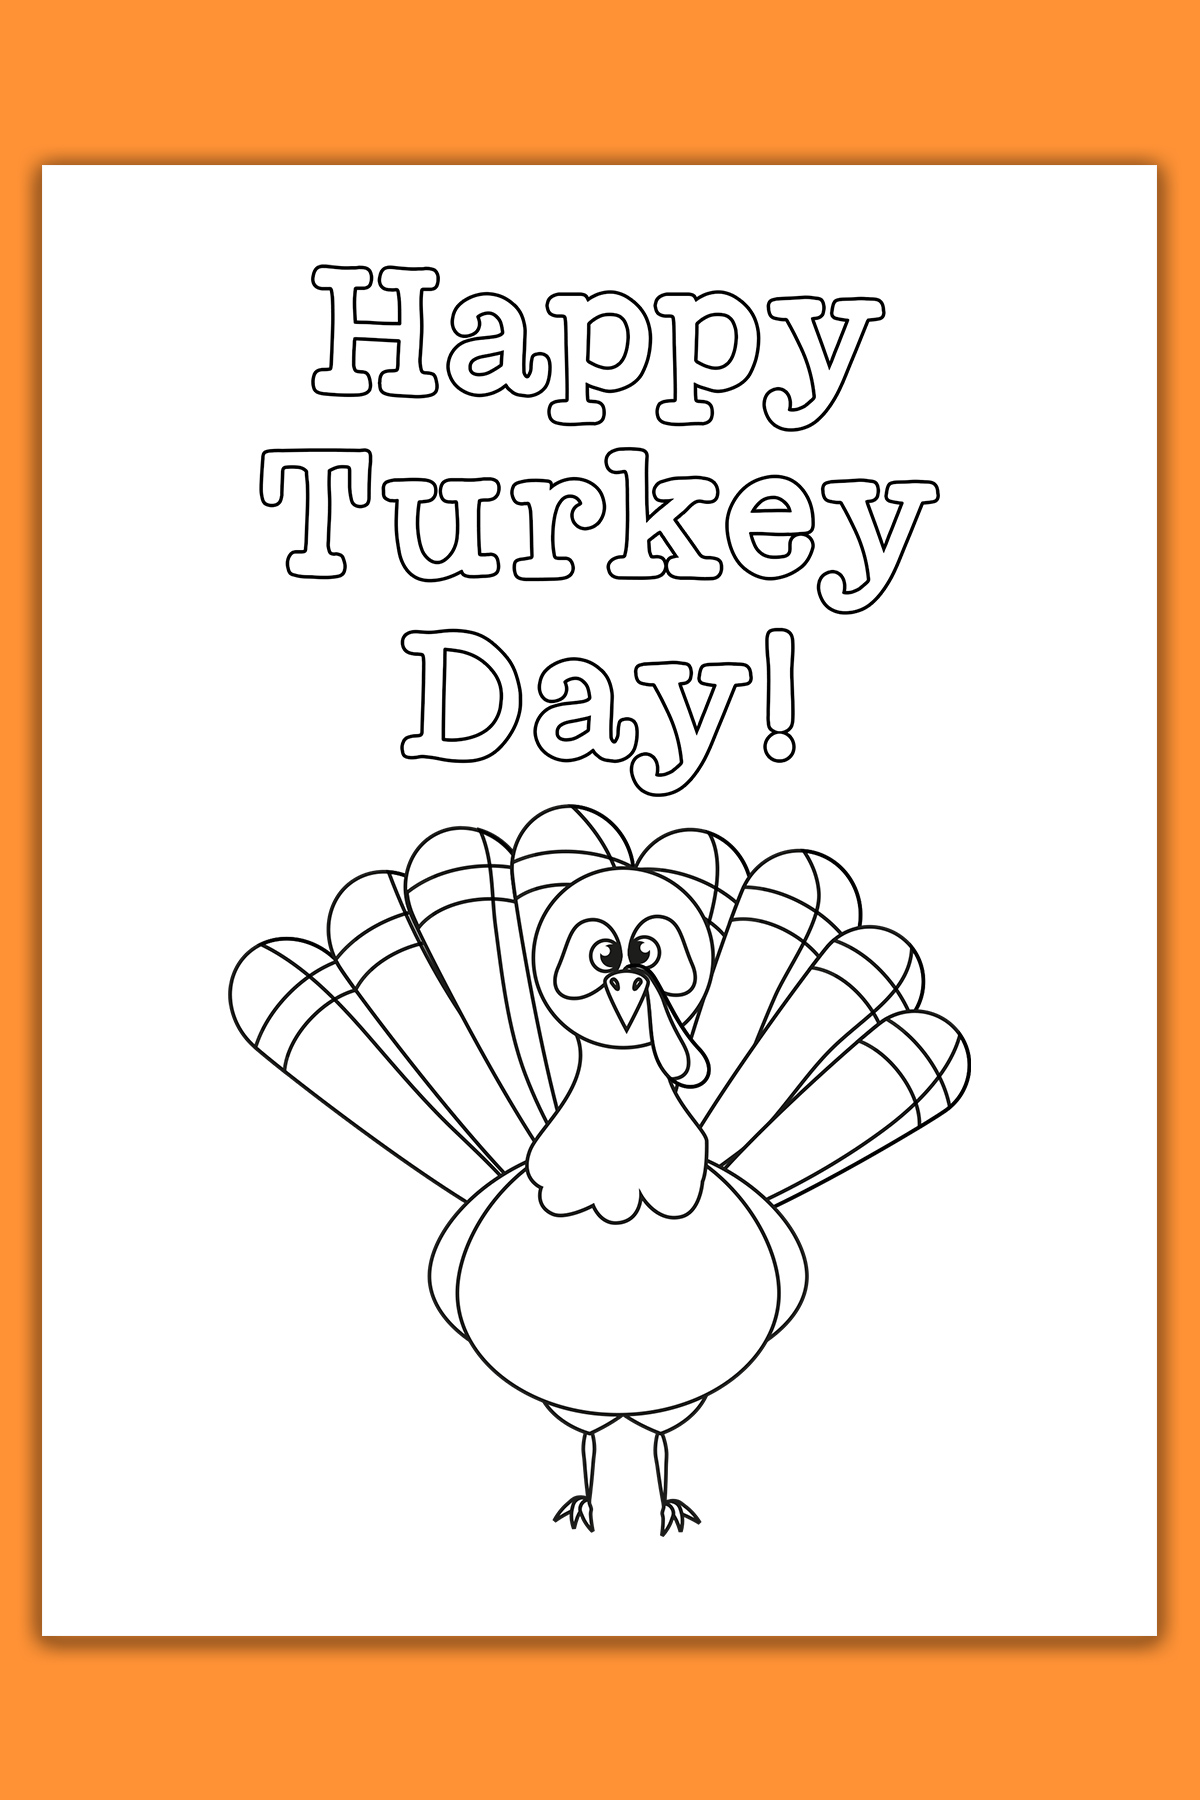 This image shows one of the cards from the thanksgiving cards coloring pages set. It says Happy Turkey Day! Below that is a drawing of a turkey.